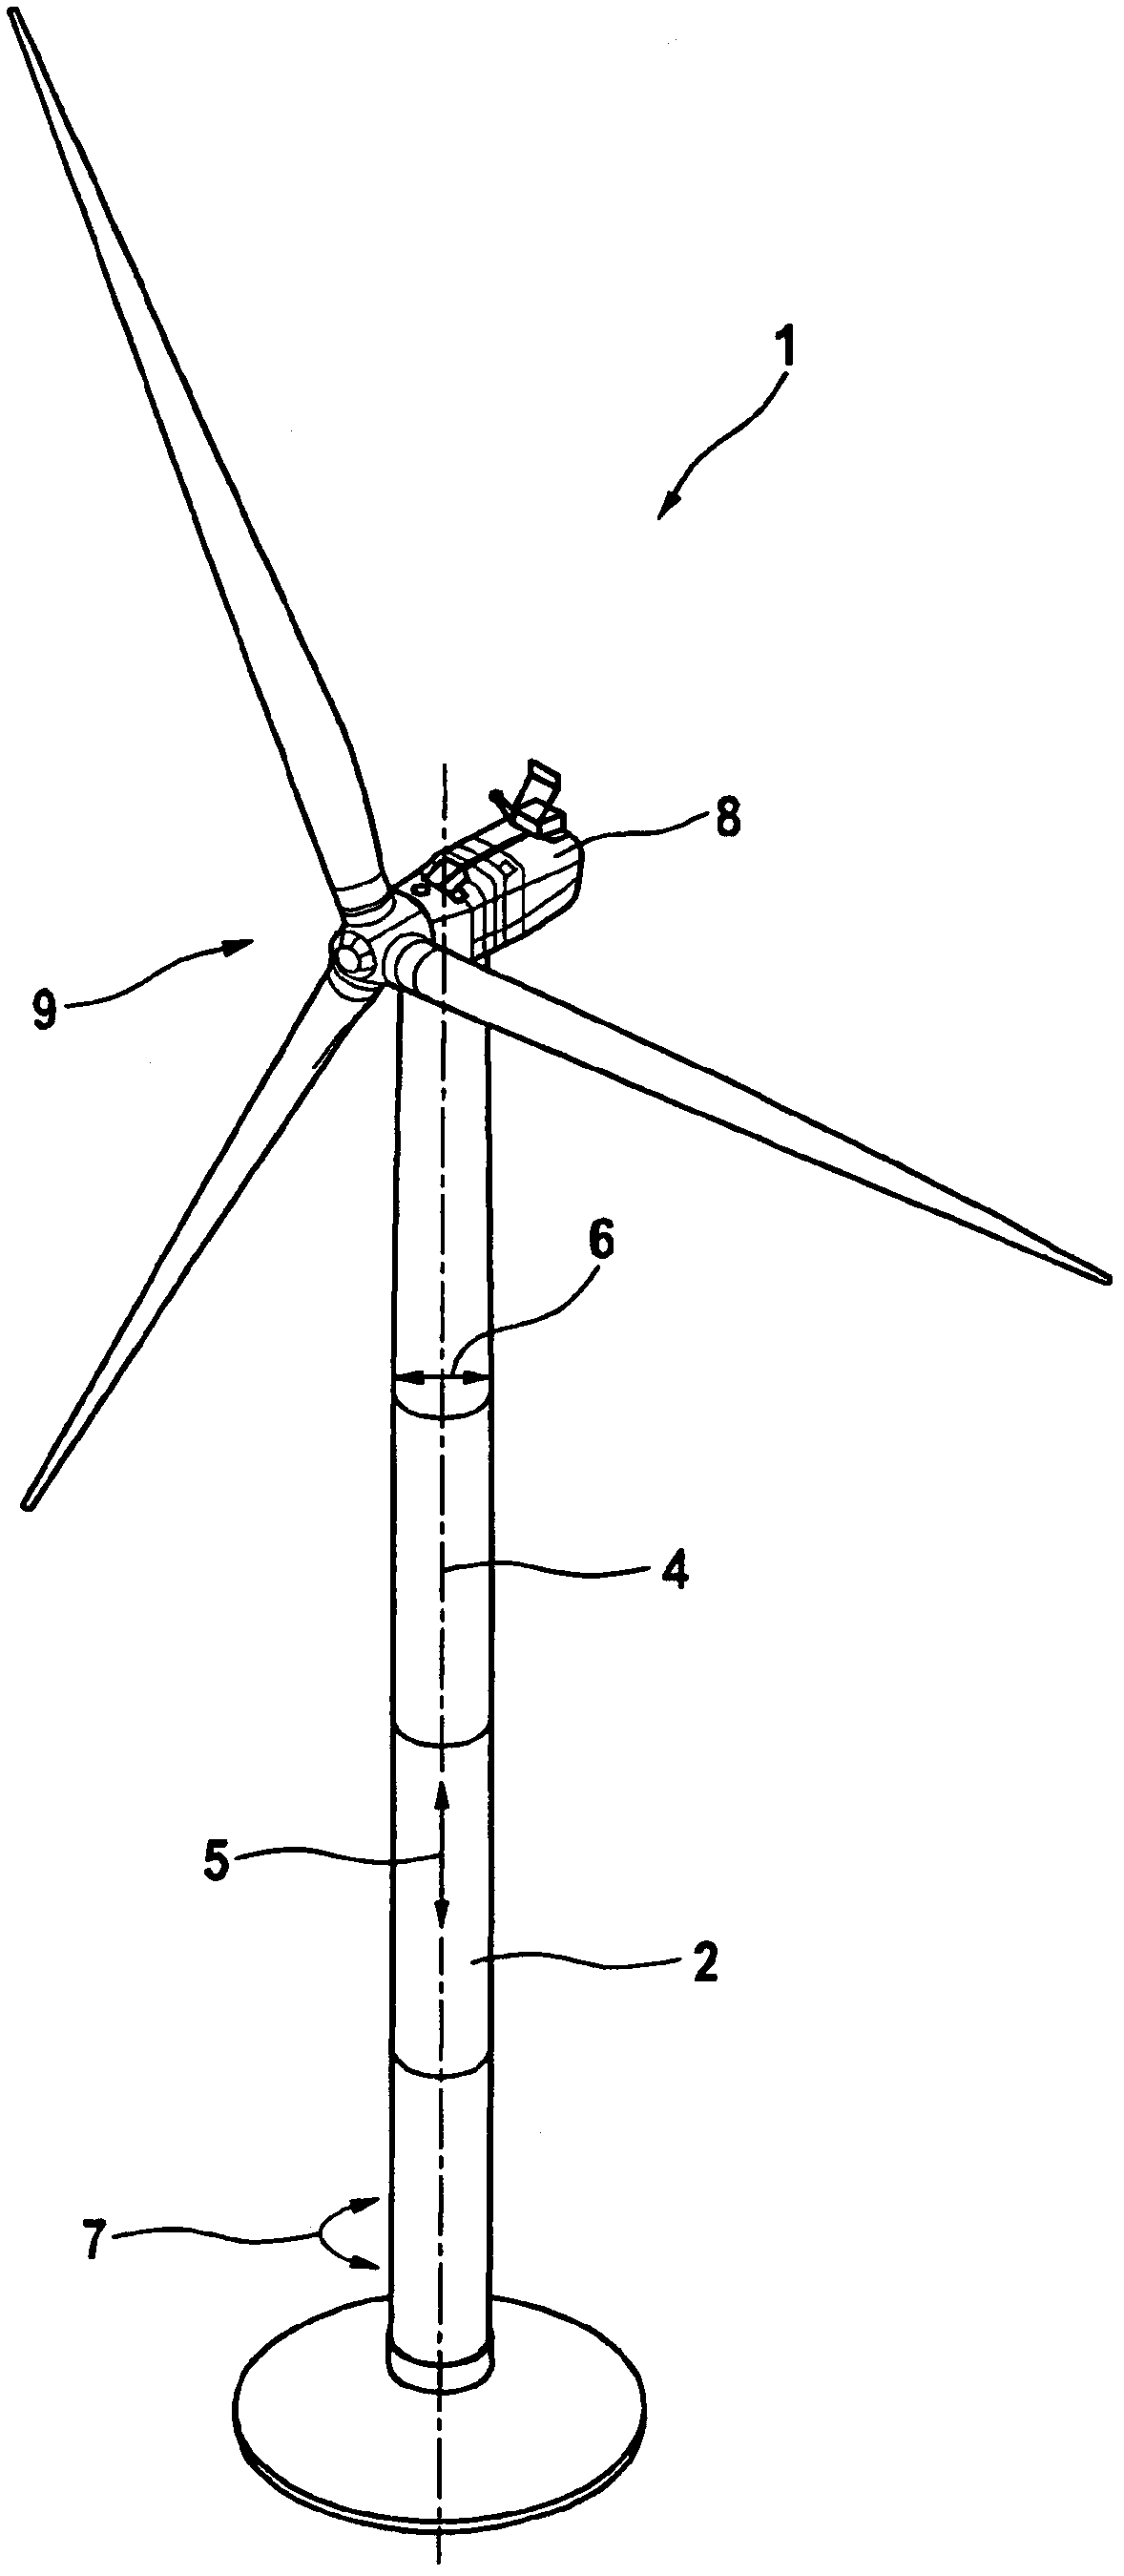 Tower for wind turbine